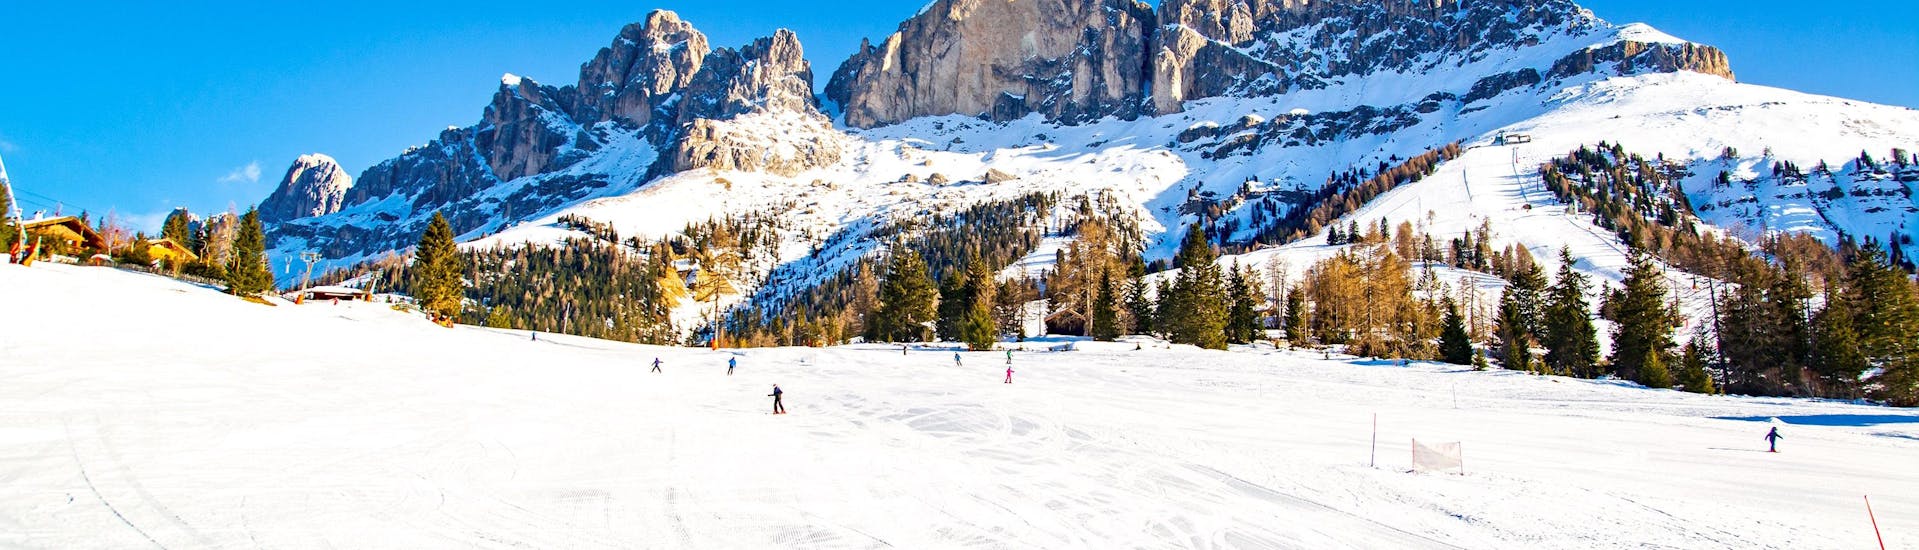 Skiers on the slopes of Carezzo al Lago on a sunny winter day.